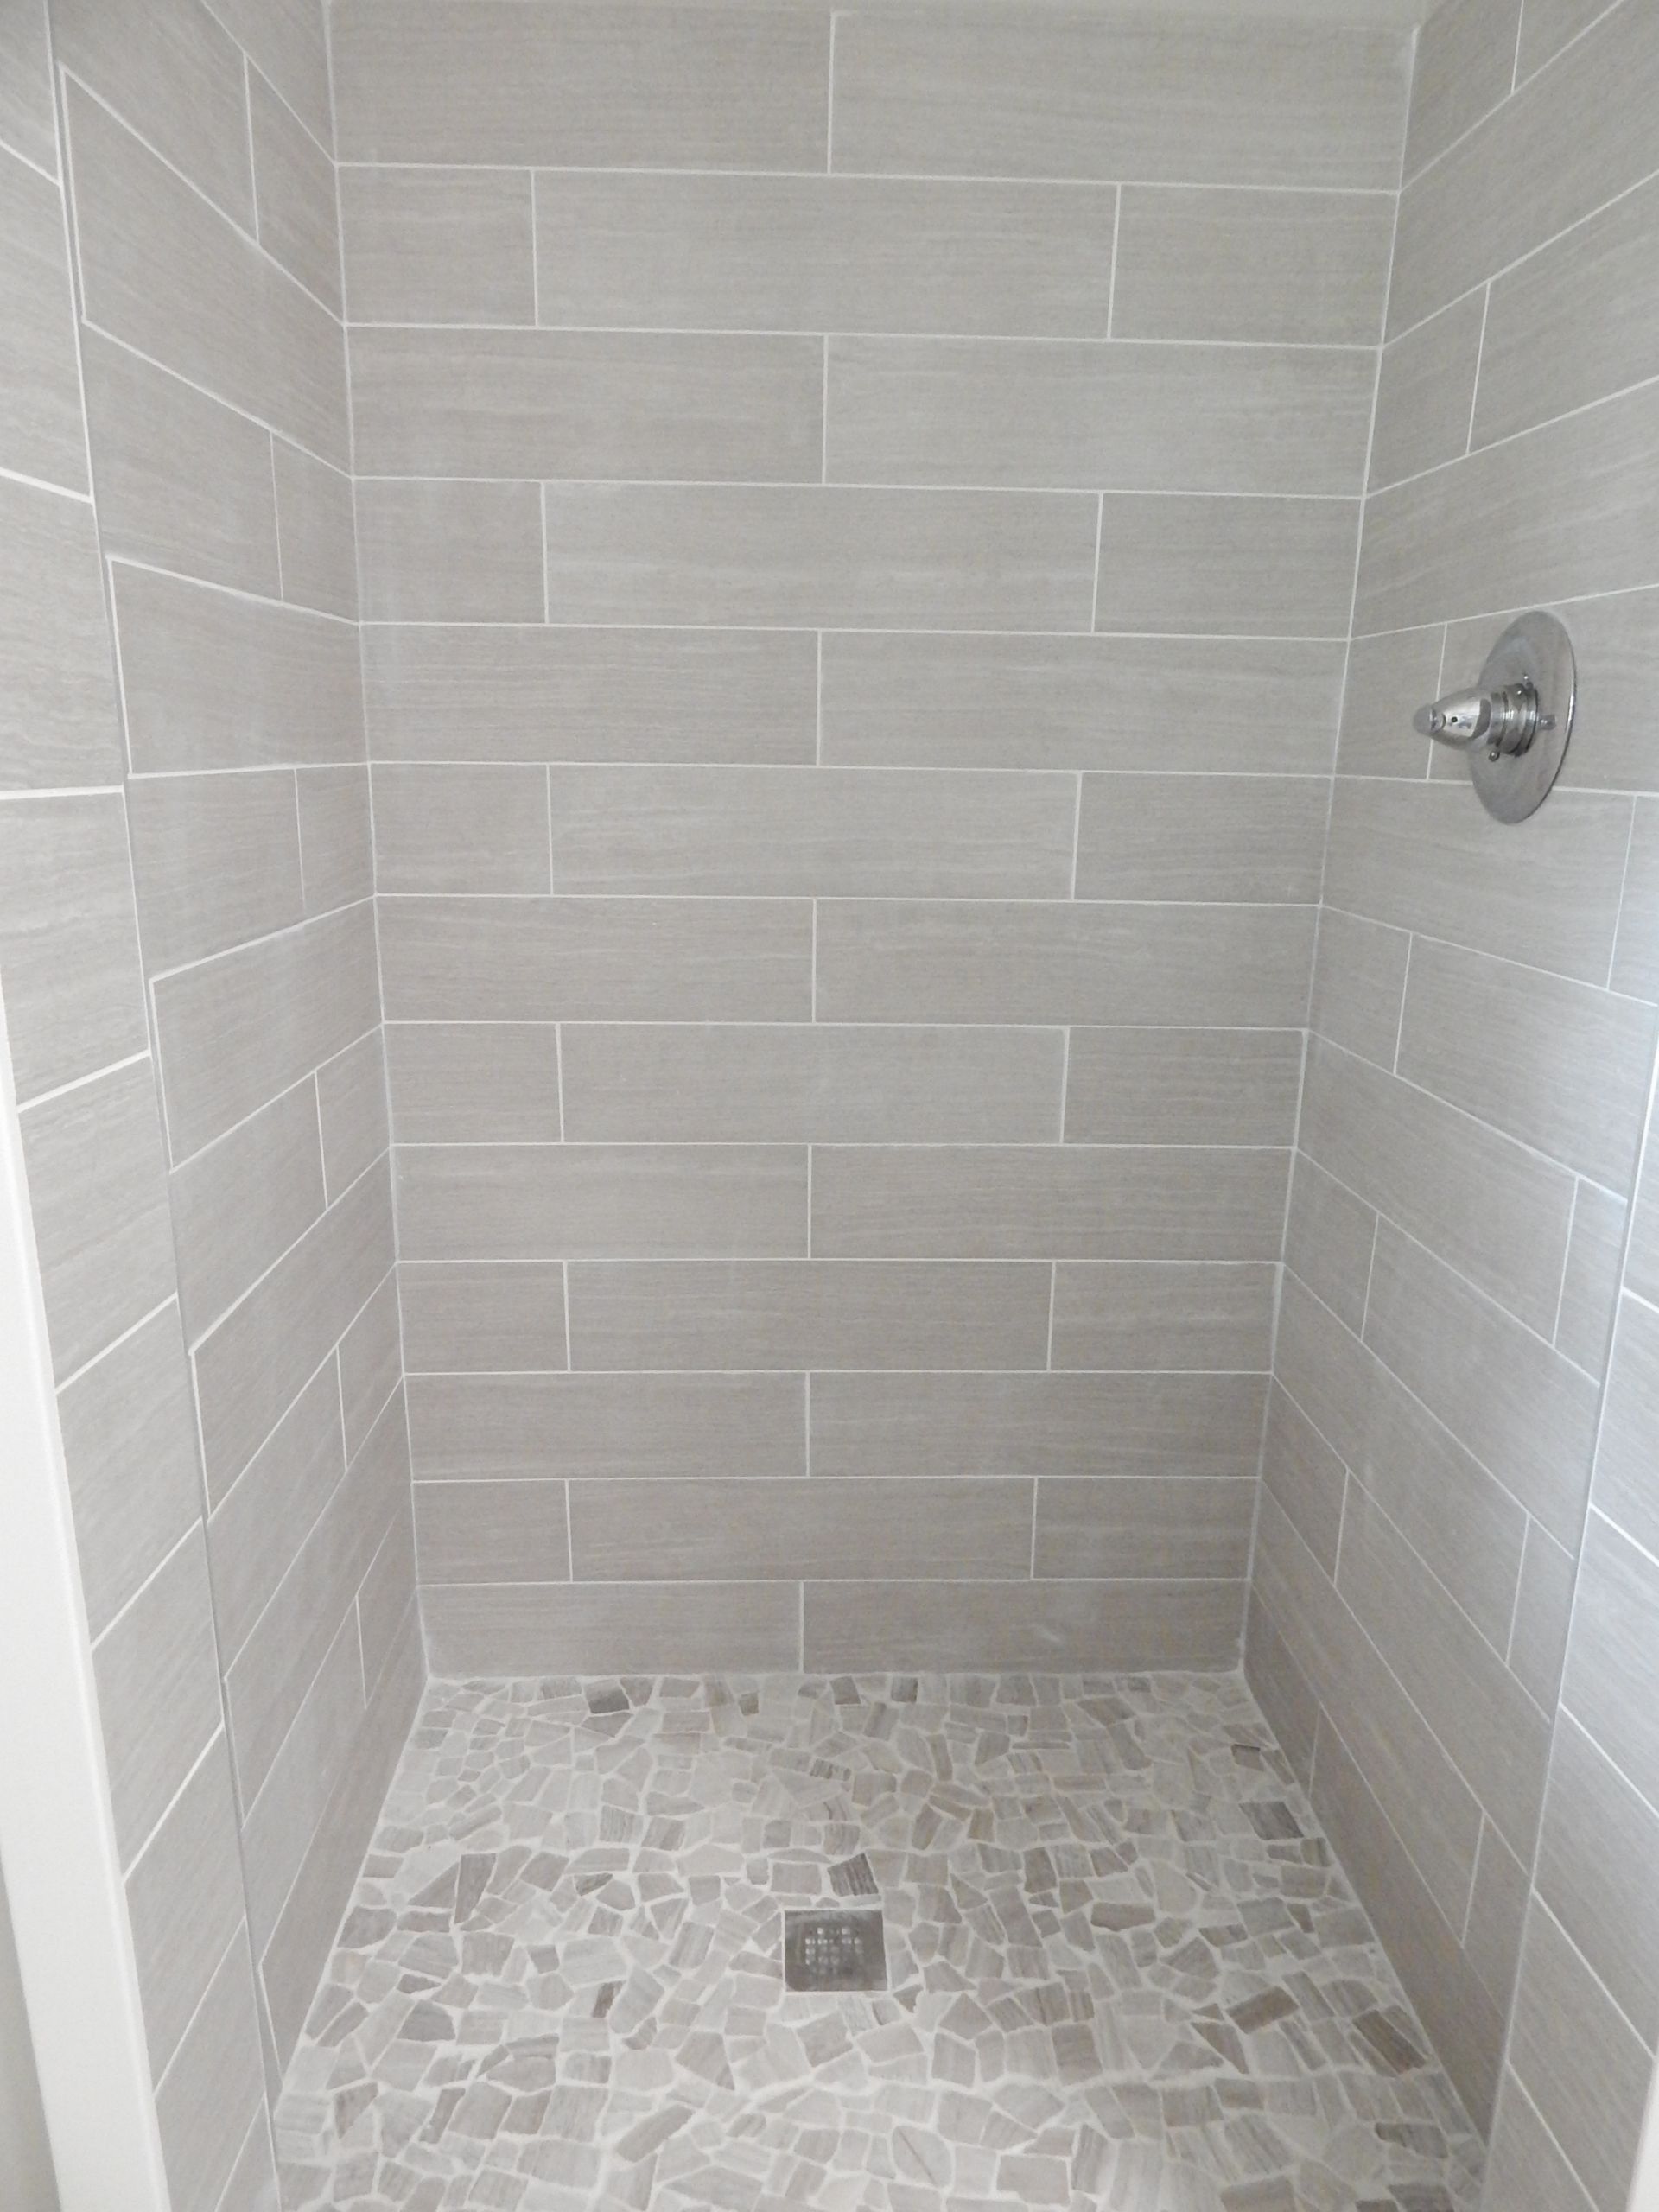 Lowes Bathroom Tiles
 Bathroom Give Your Shower Some Character With New Lowes